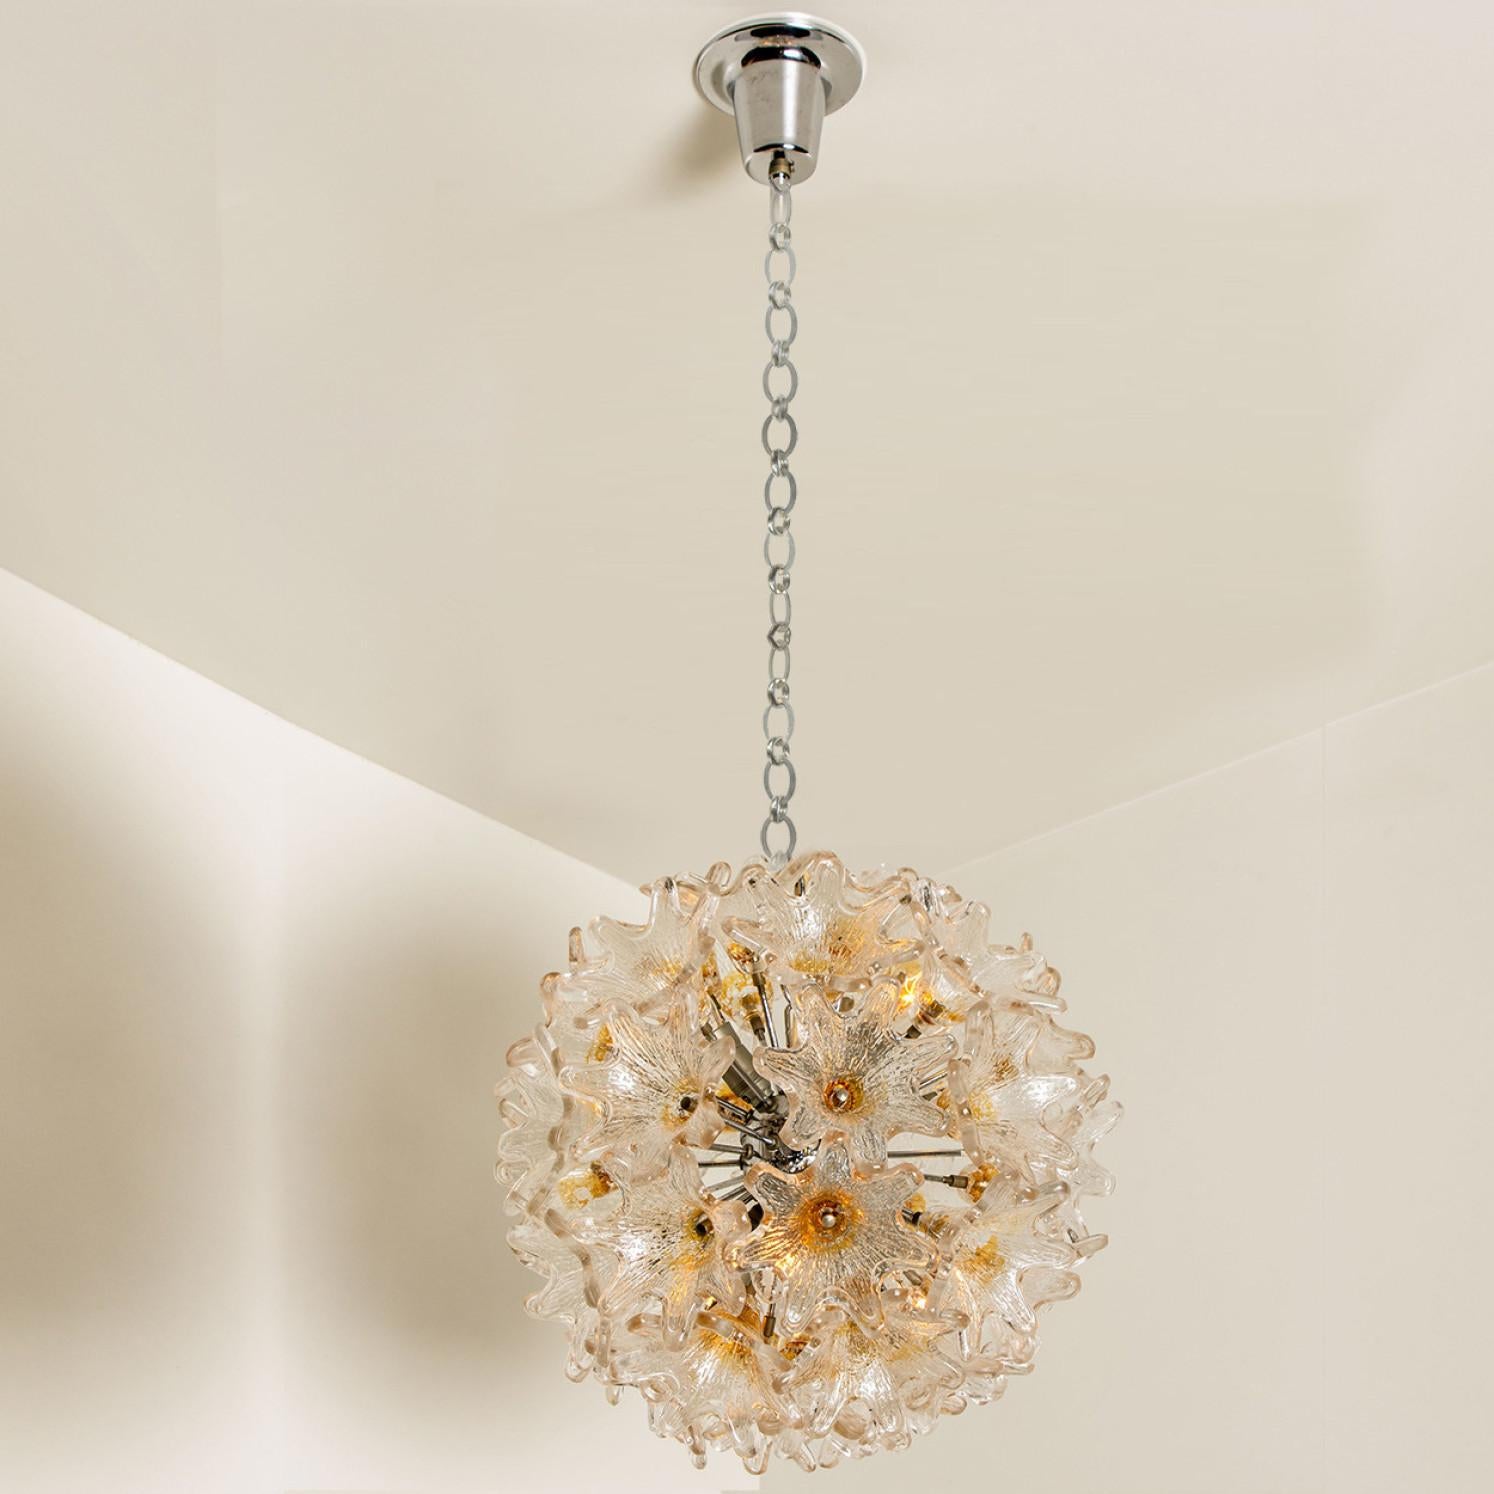 Elegant Murano light fixture by Paolo Venini for VeArt, Italy, 1960s. Chrome fixture with star shaped gold/amber and clear resembles flowers. The light illuminates beautifully on wall and ceiling.

The length of the chain can be adjusted as required